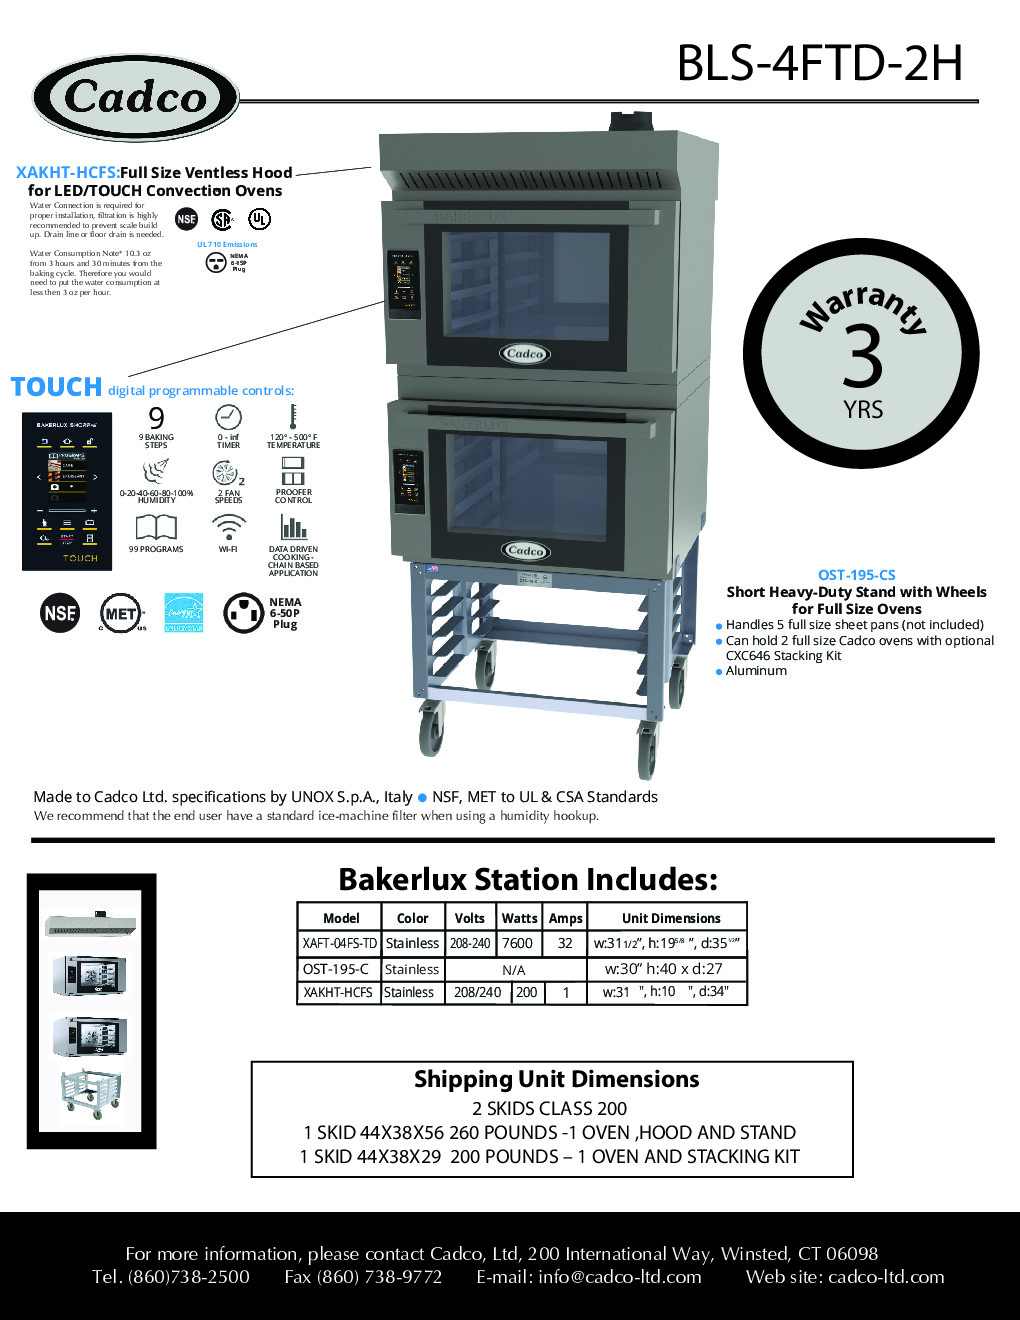 Cadco BLS-4FTD-2H Double-Deck Electric Convection Oven w/ Digital Touch Controls, Full-Size